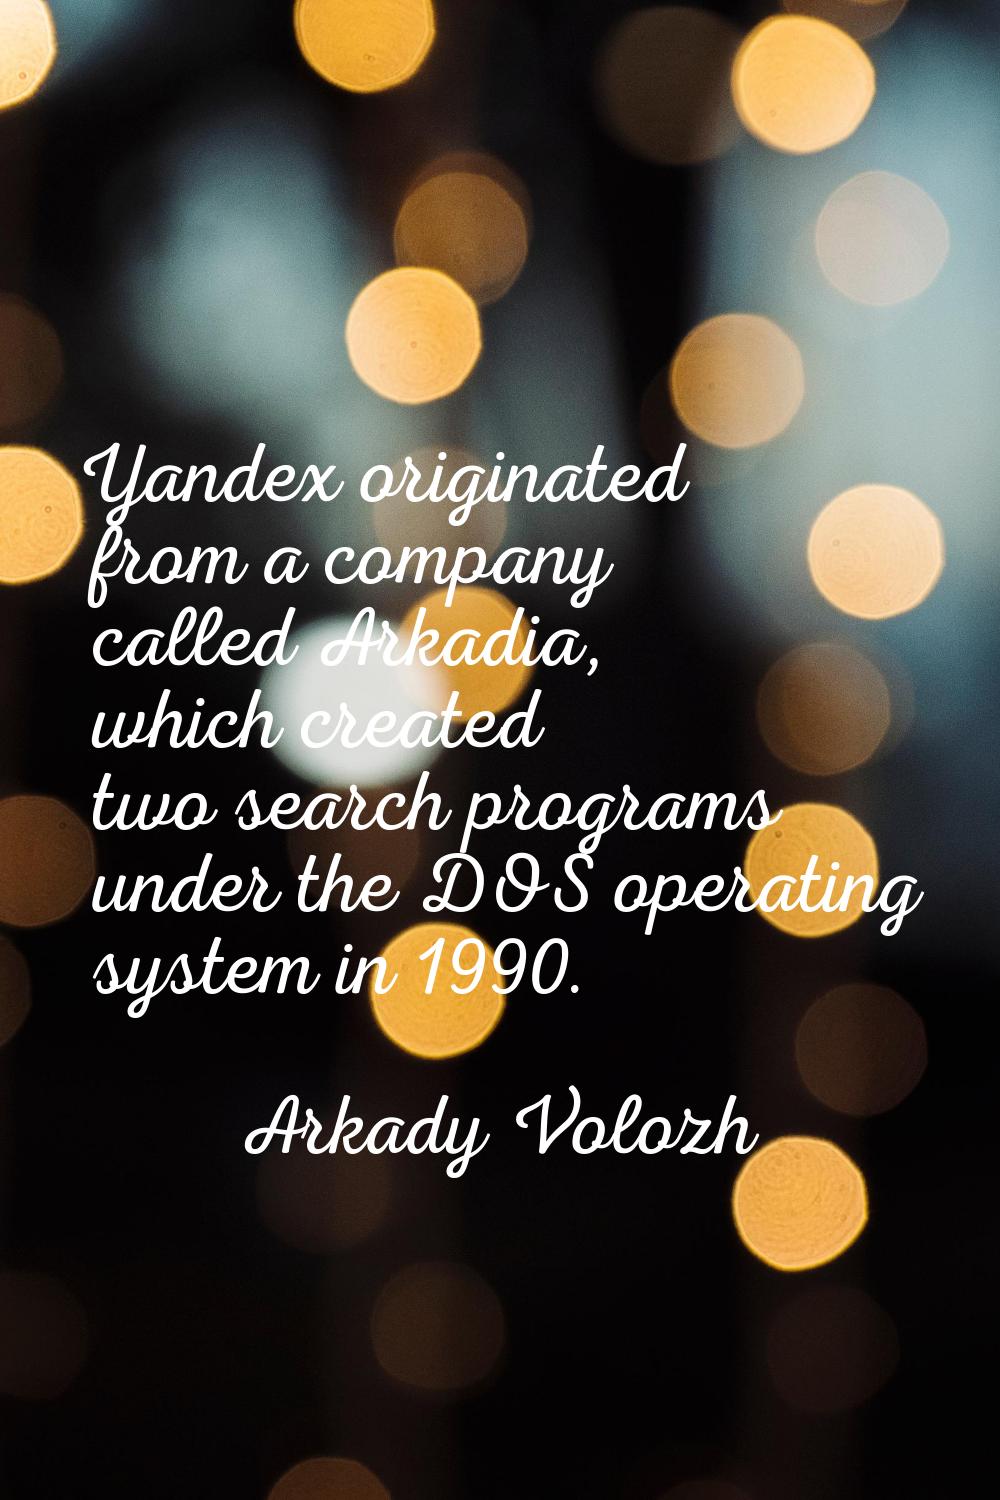 Yandex originated from a company called Arkadia, which created two search programs under the DOS op